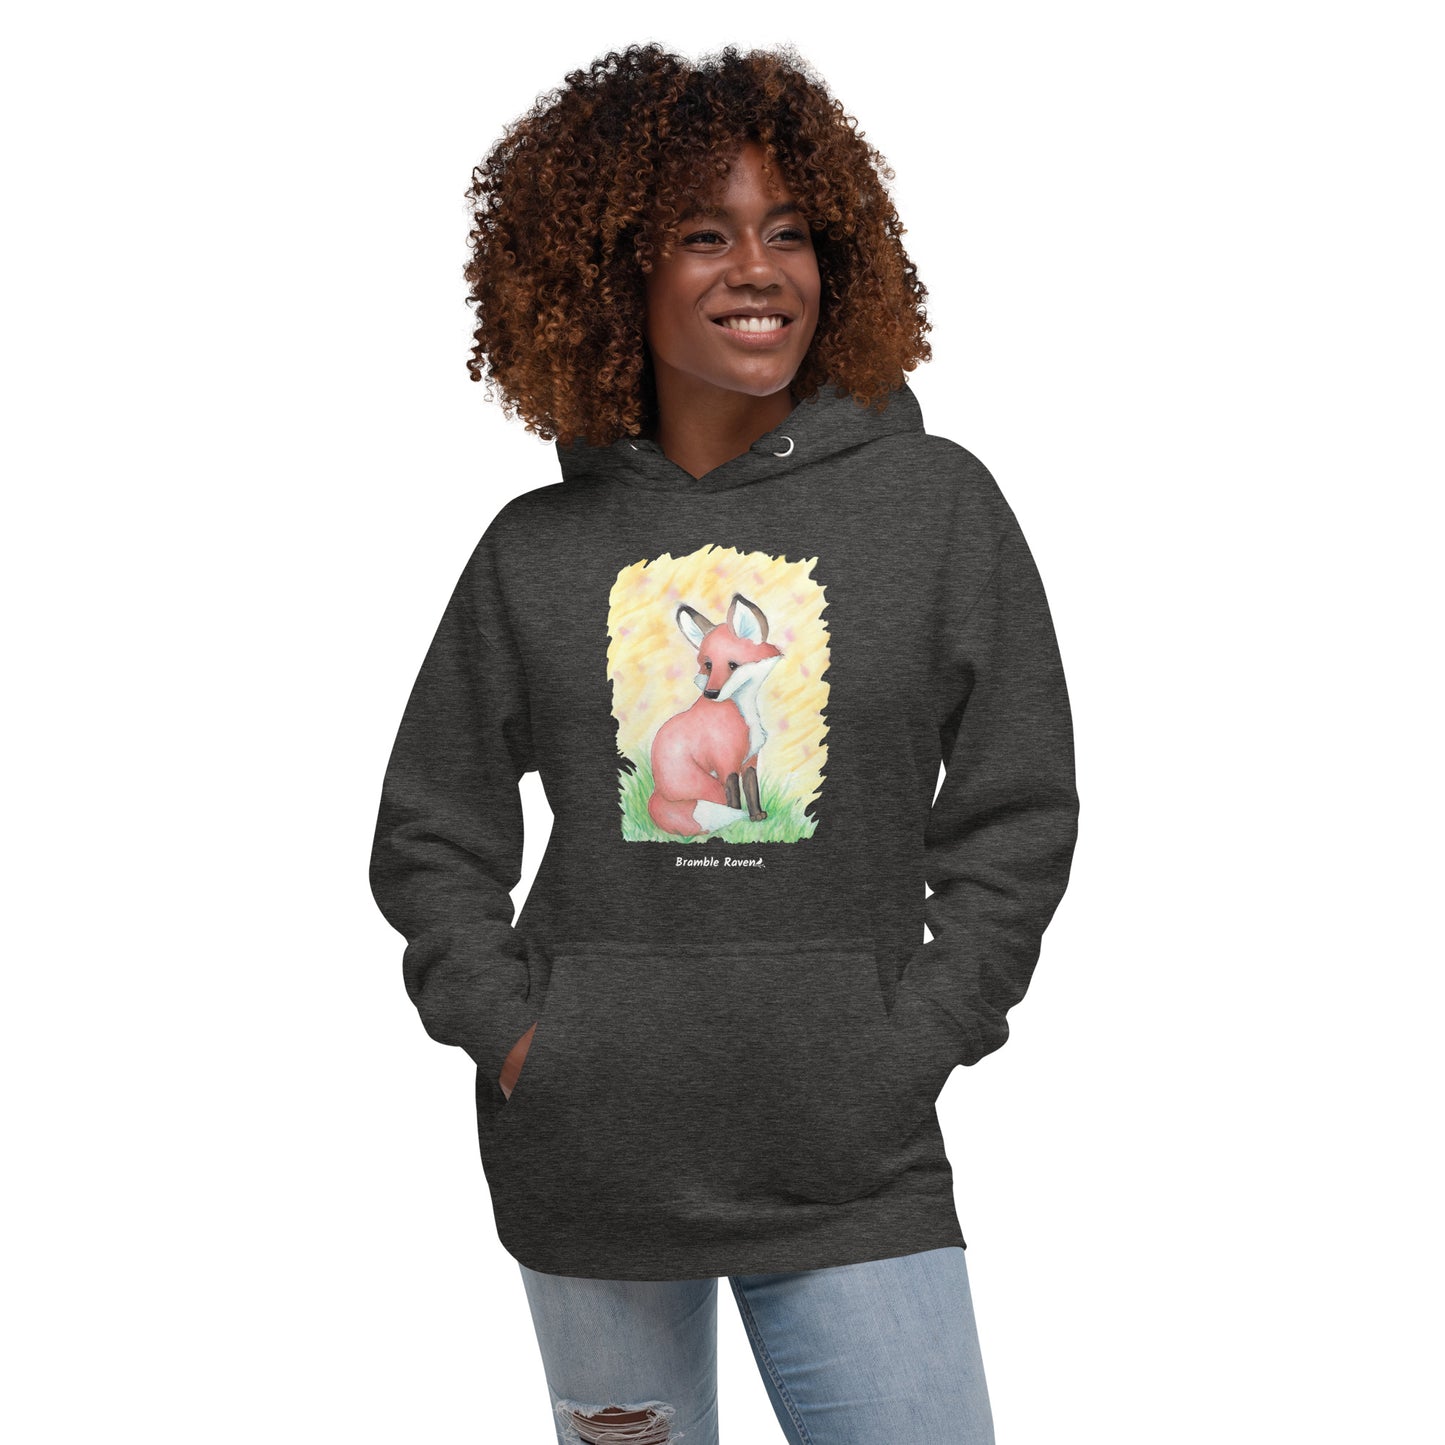 Unisex charcoal heather grey colored hoodie. Features original watercolor painting of a fox in the grass against a yellow backdrop. Shown on female model.